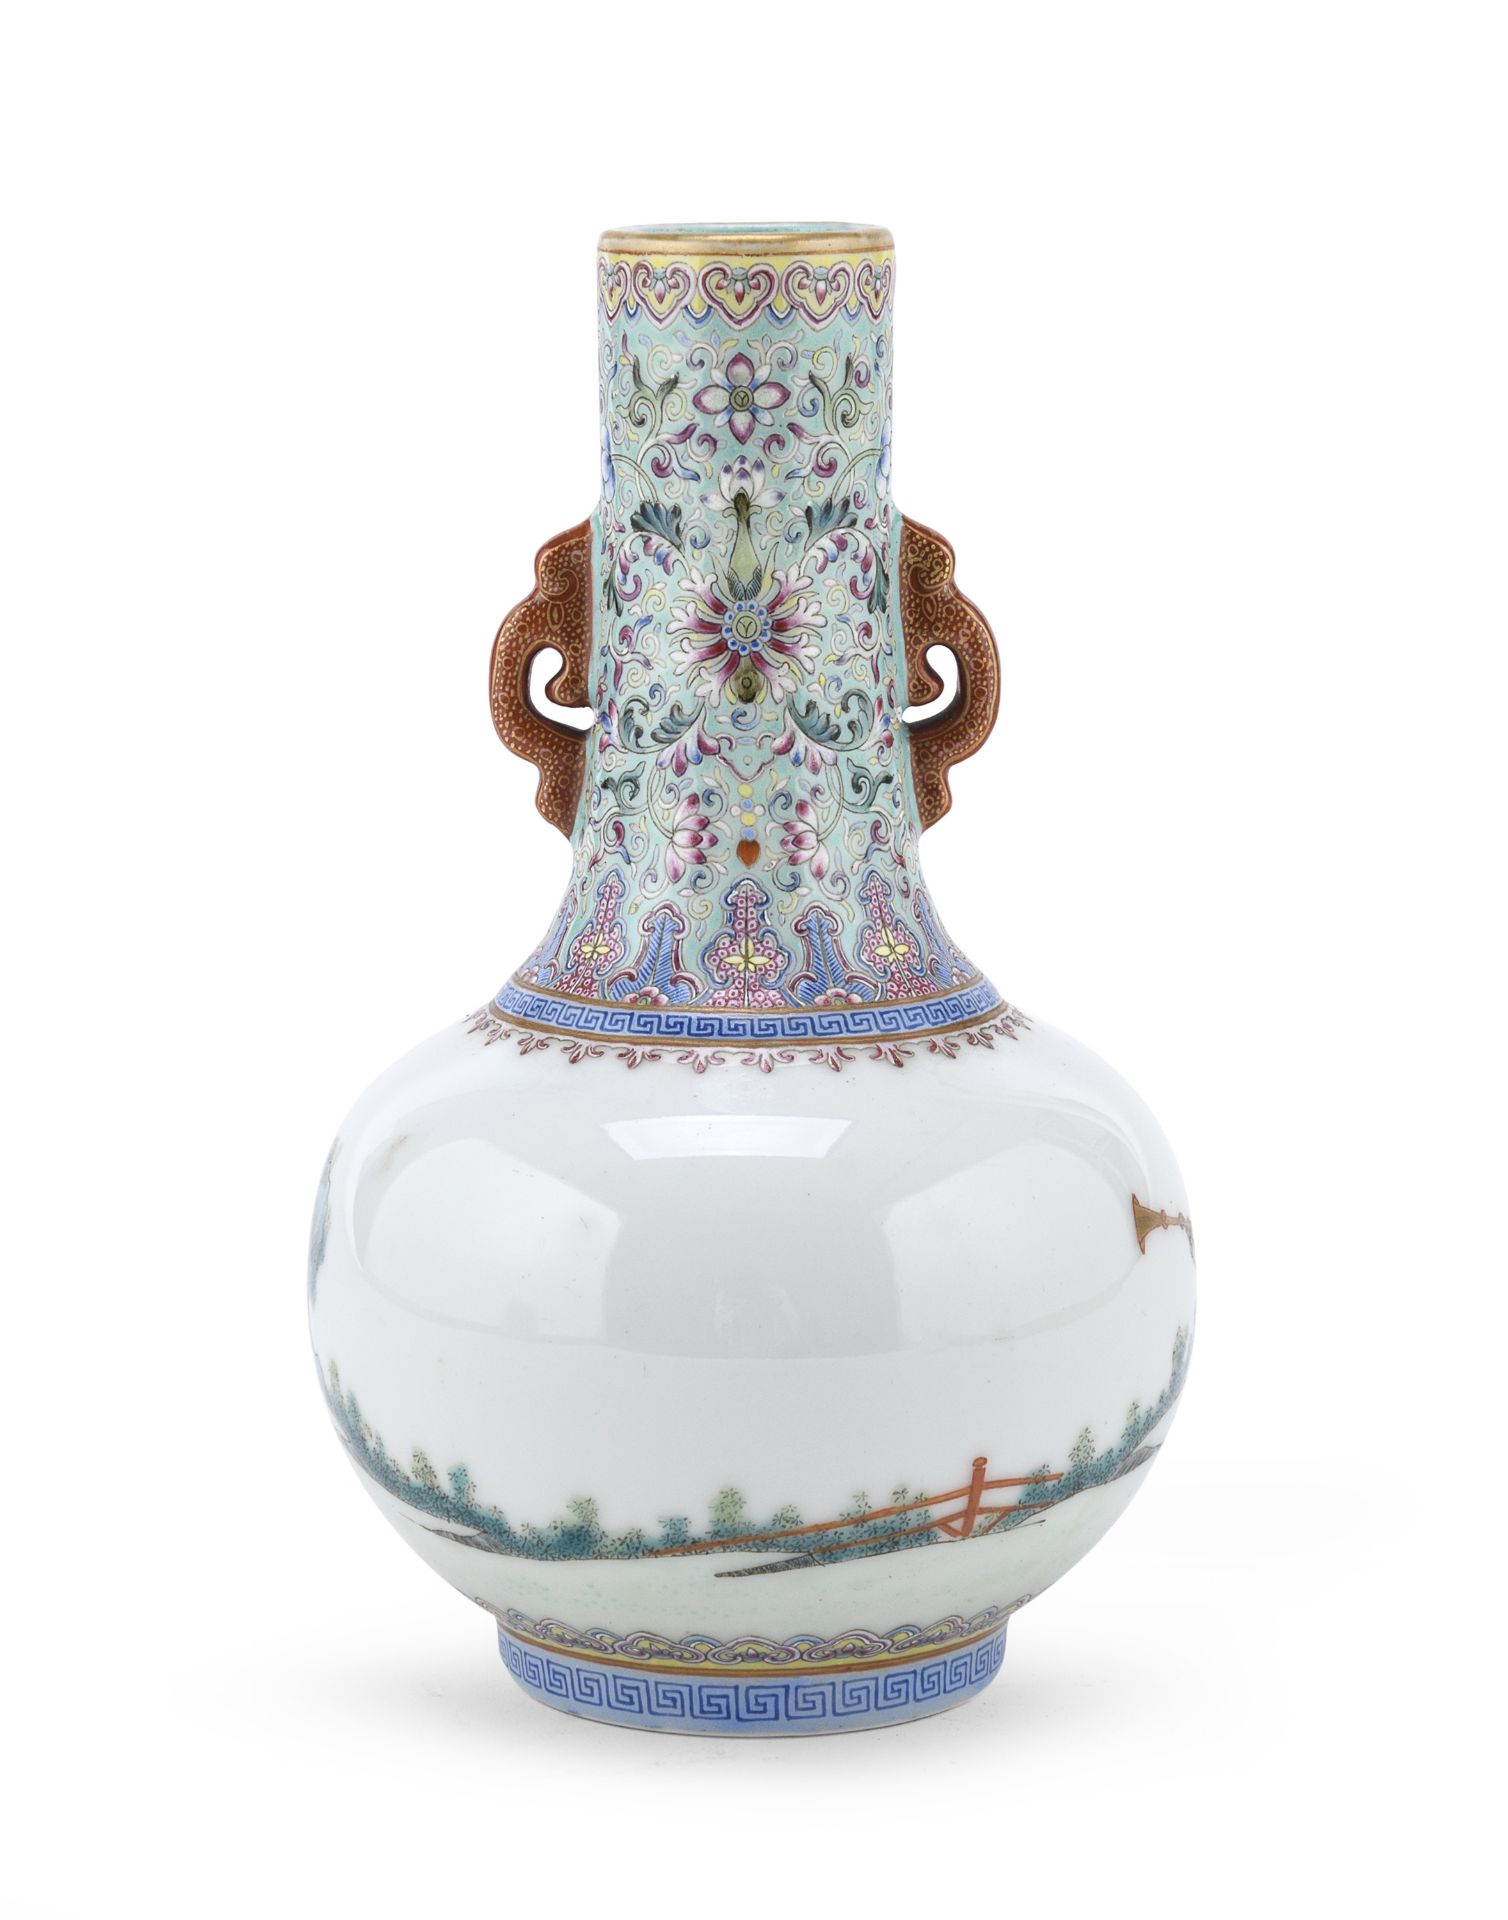 RARE PORCELAIN VASE WITH POLYCHROME ENAMELS AND GOLD CHINA 19TH CENTURY - Image 2 of 3